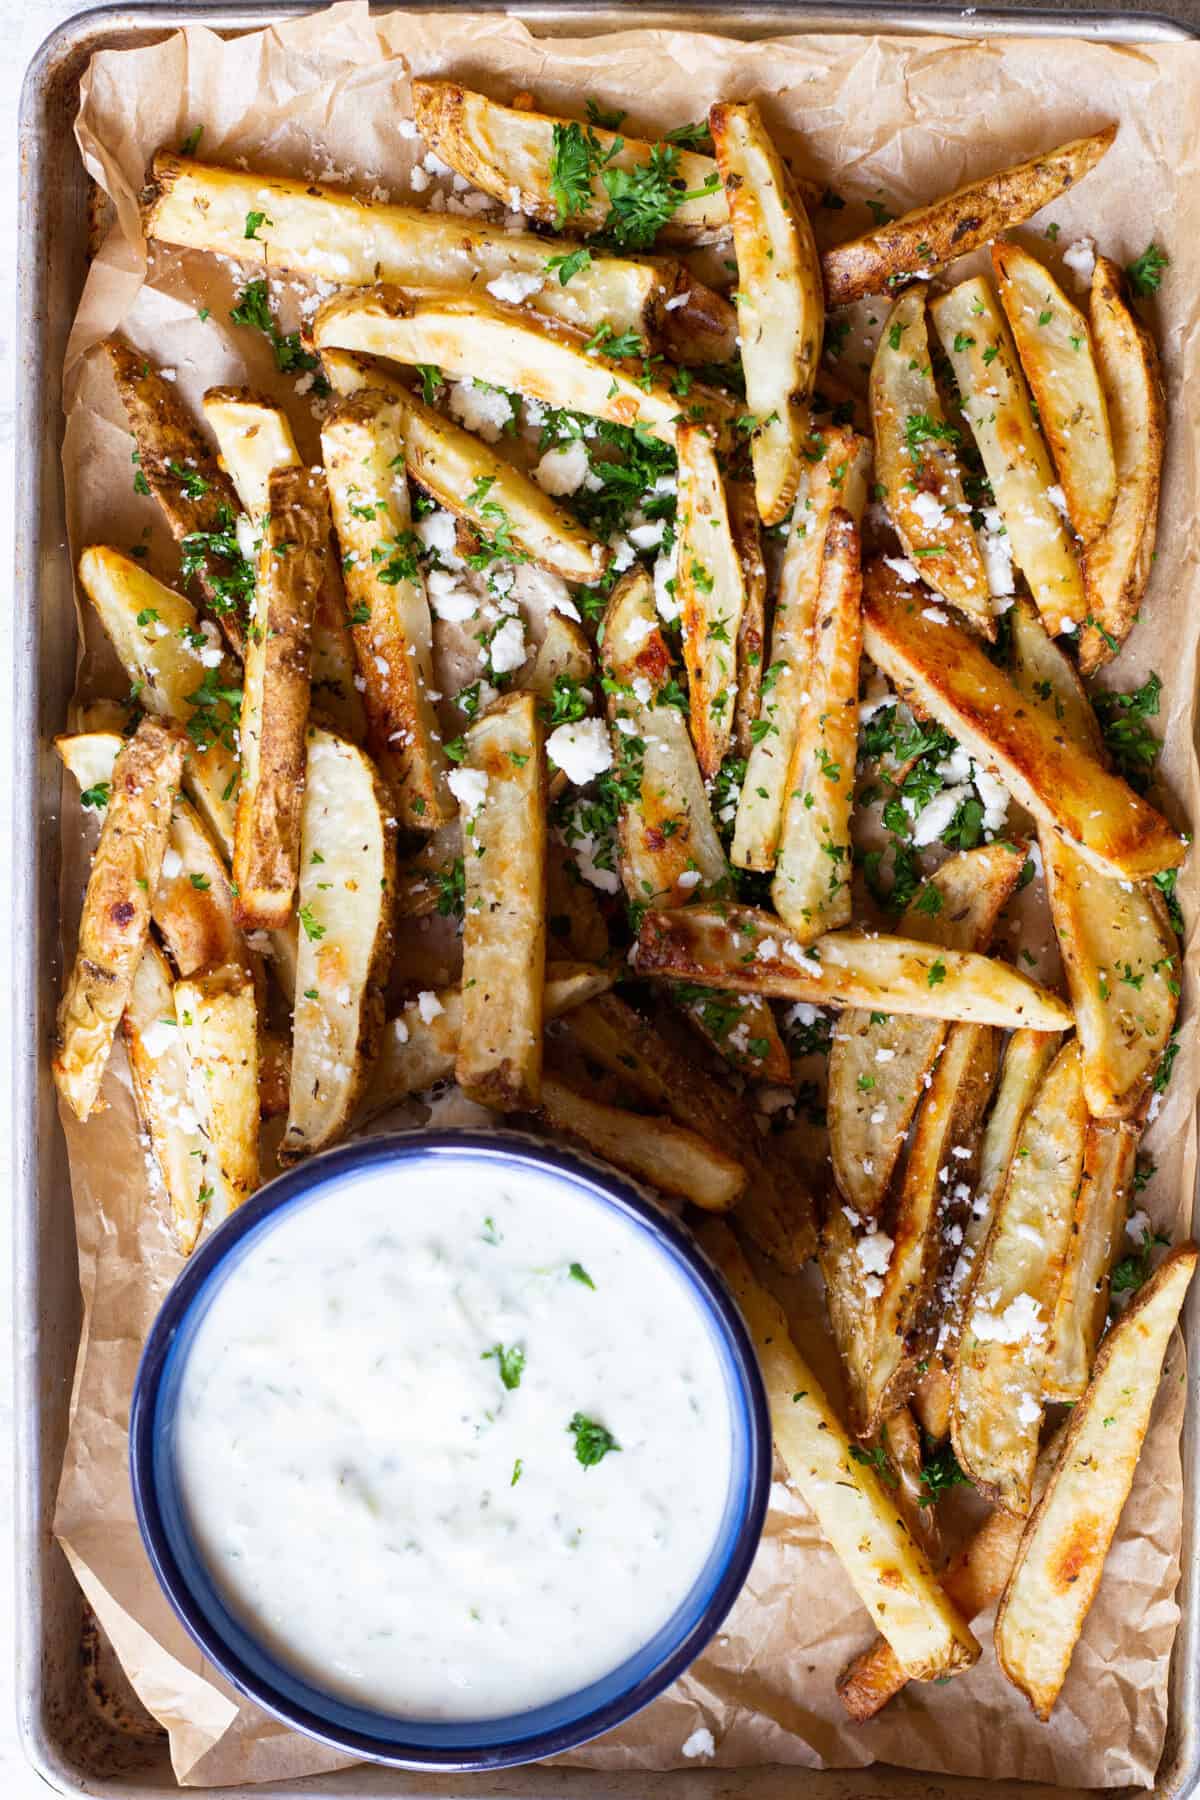 These are the best Greek fries ever, topped with feta cheese and parsley.